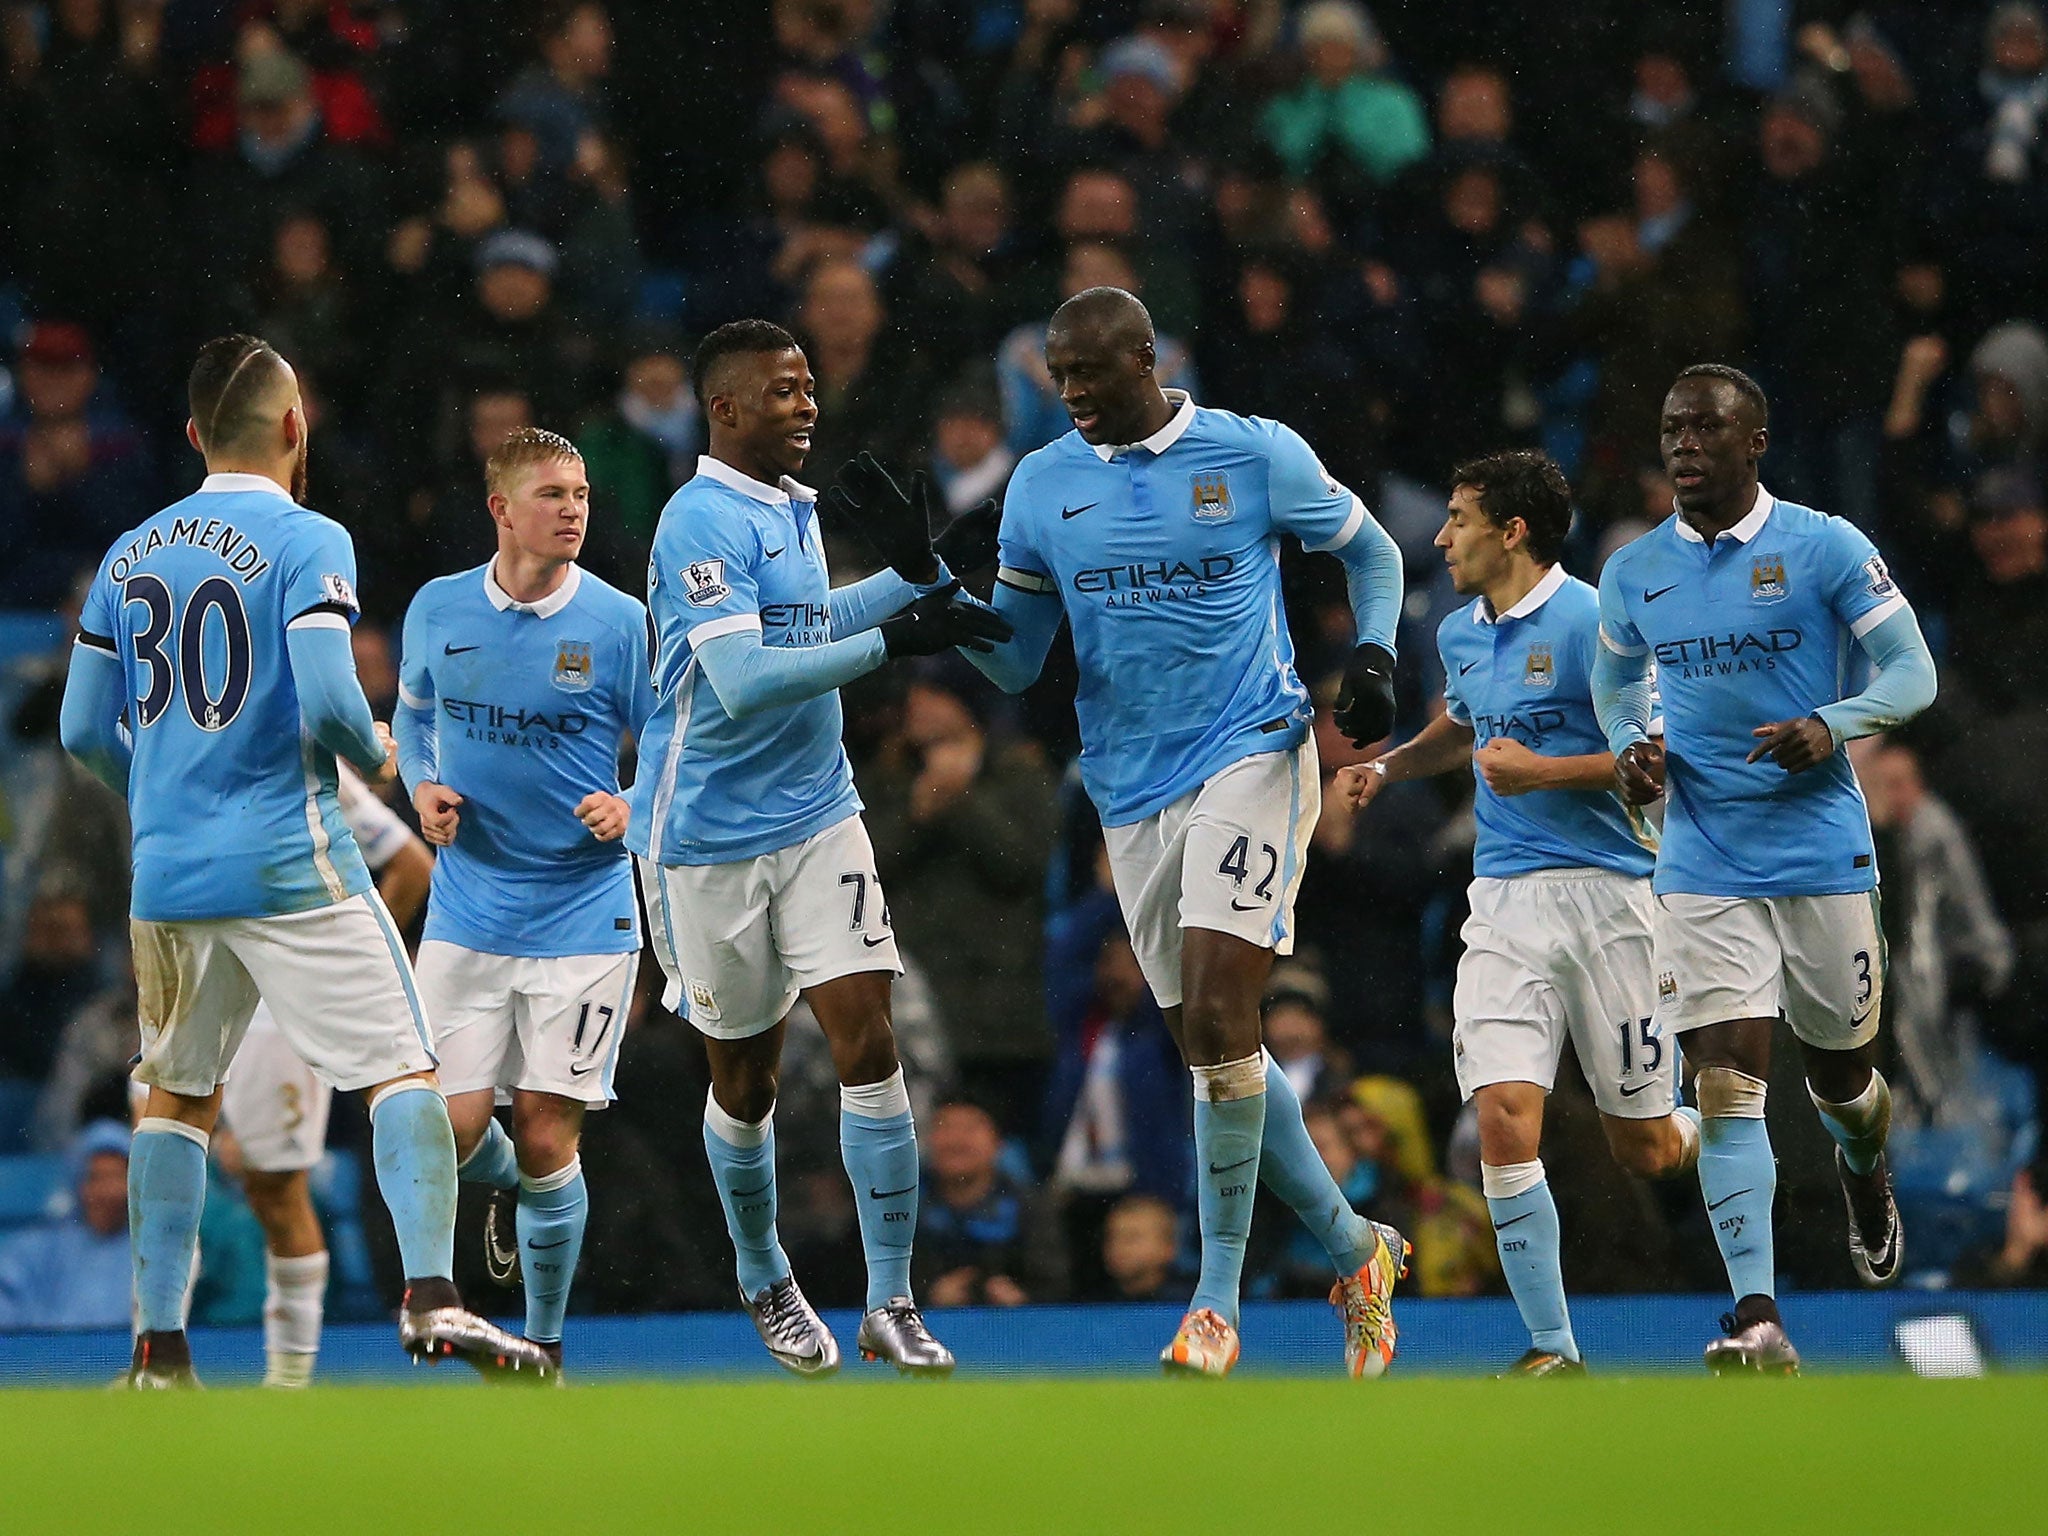 Yaya Toure is congratulated on scoring for Manchester City